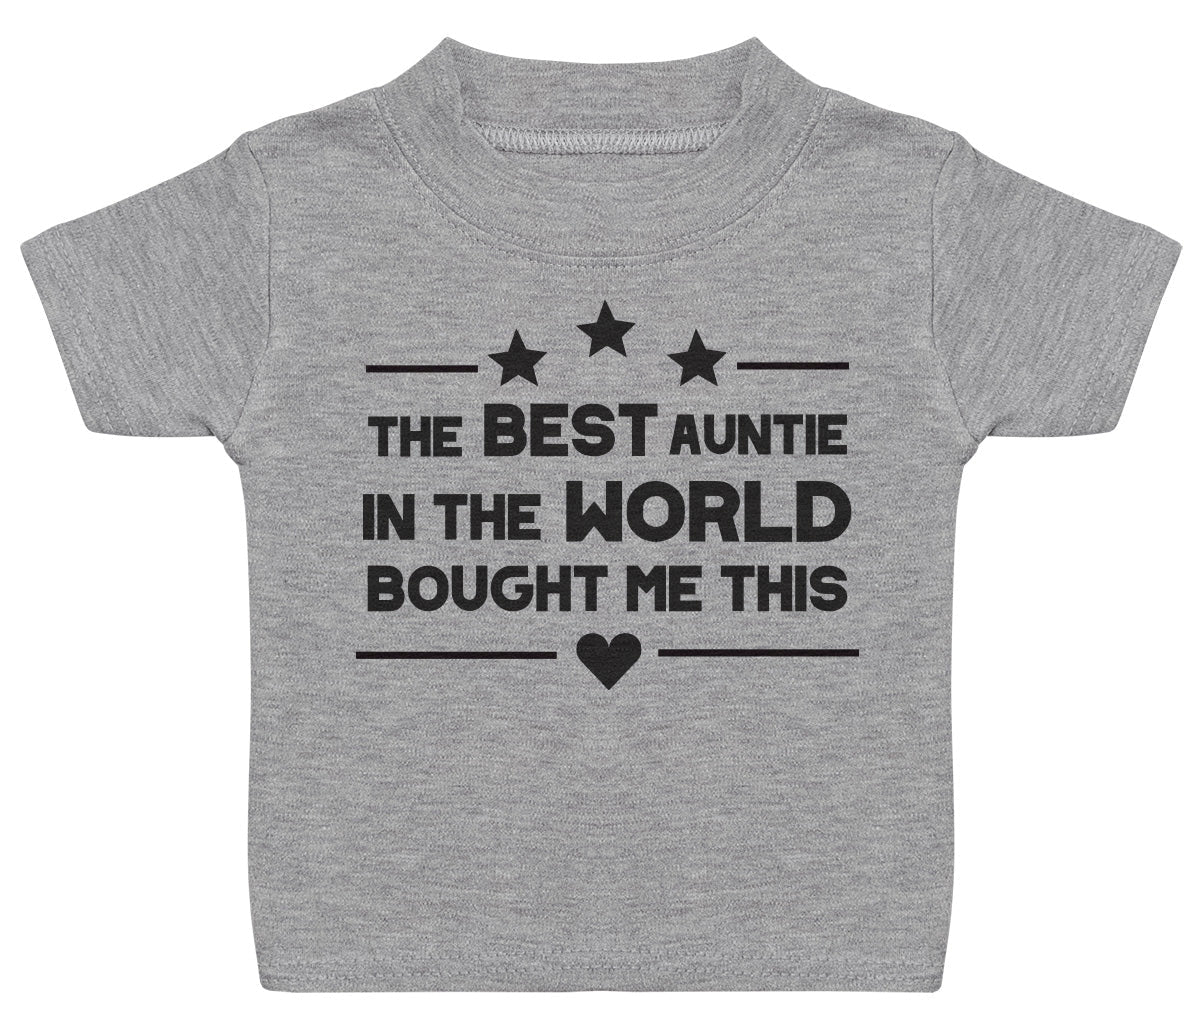 Pick A Family Name - The Best Mummy, Auntie, Grandad and more In The World Brought This - Baby & Kids T-Shirt